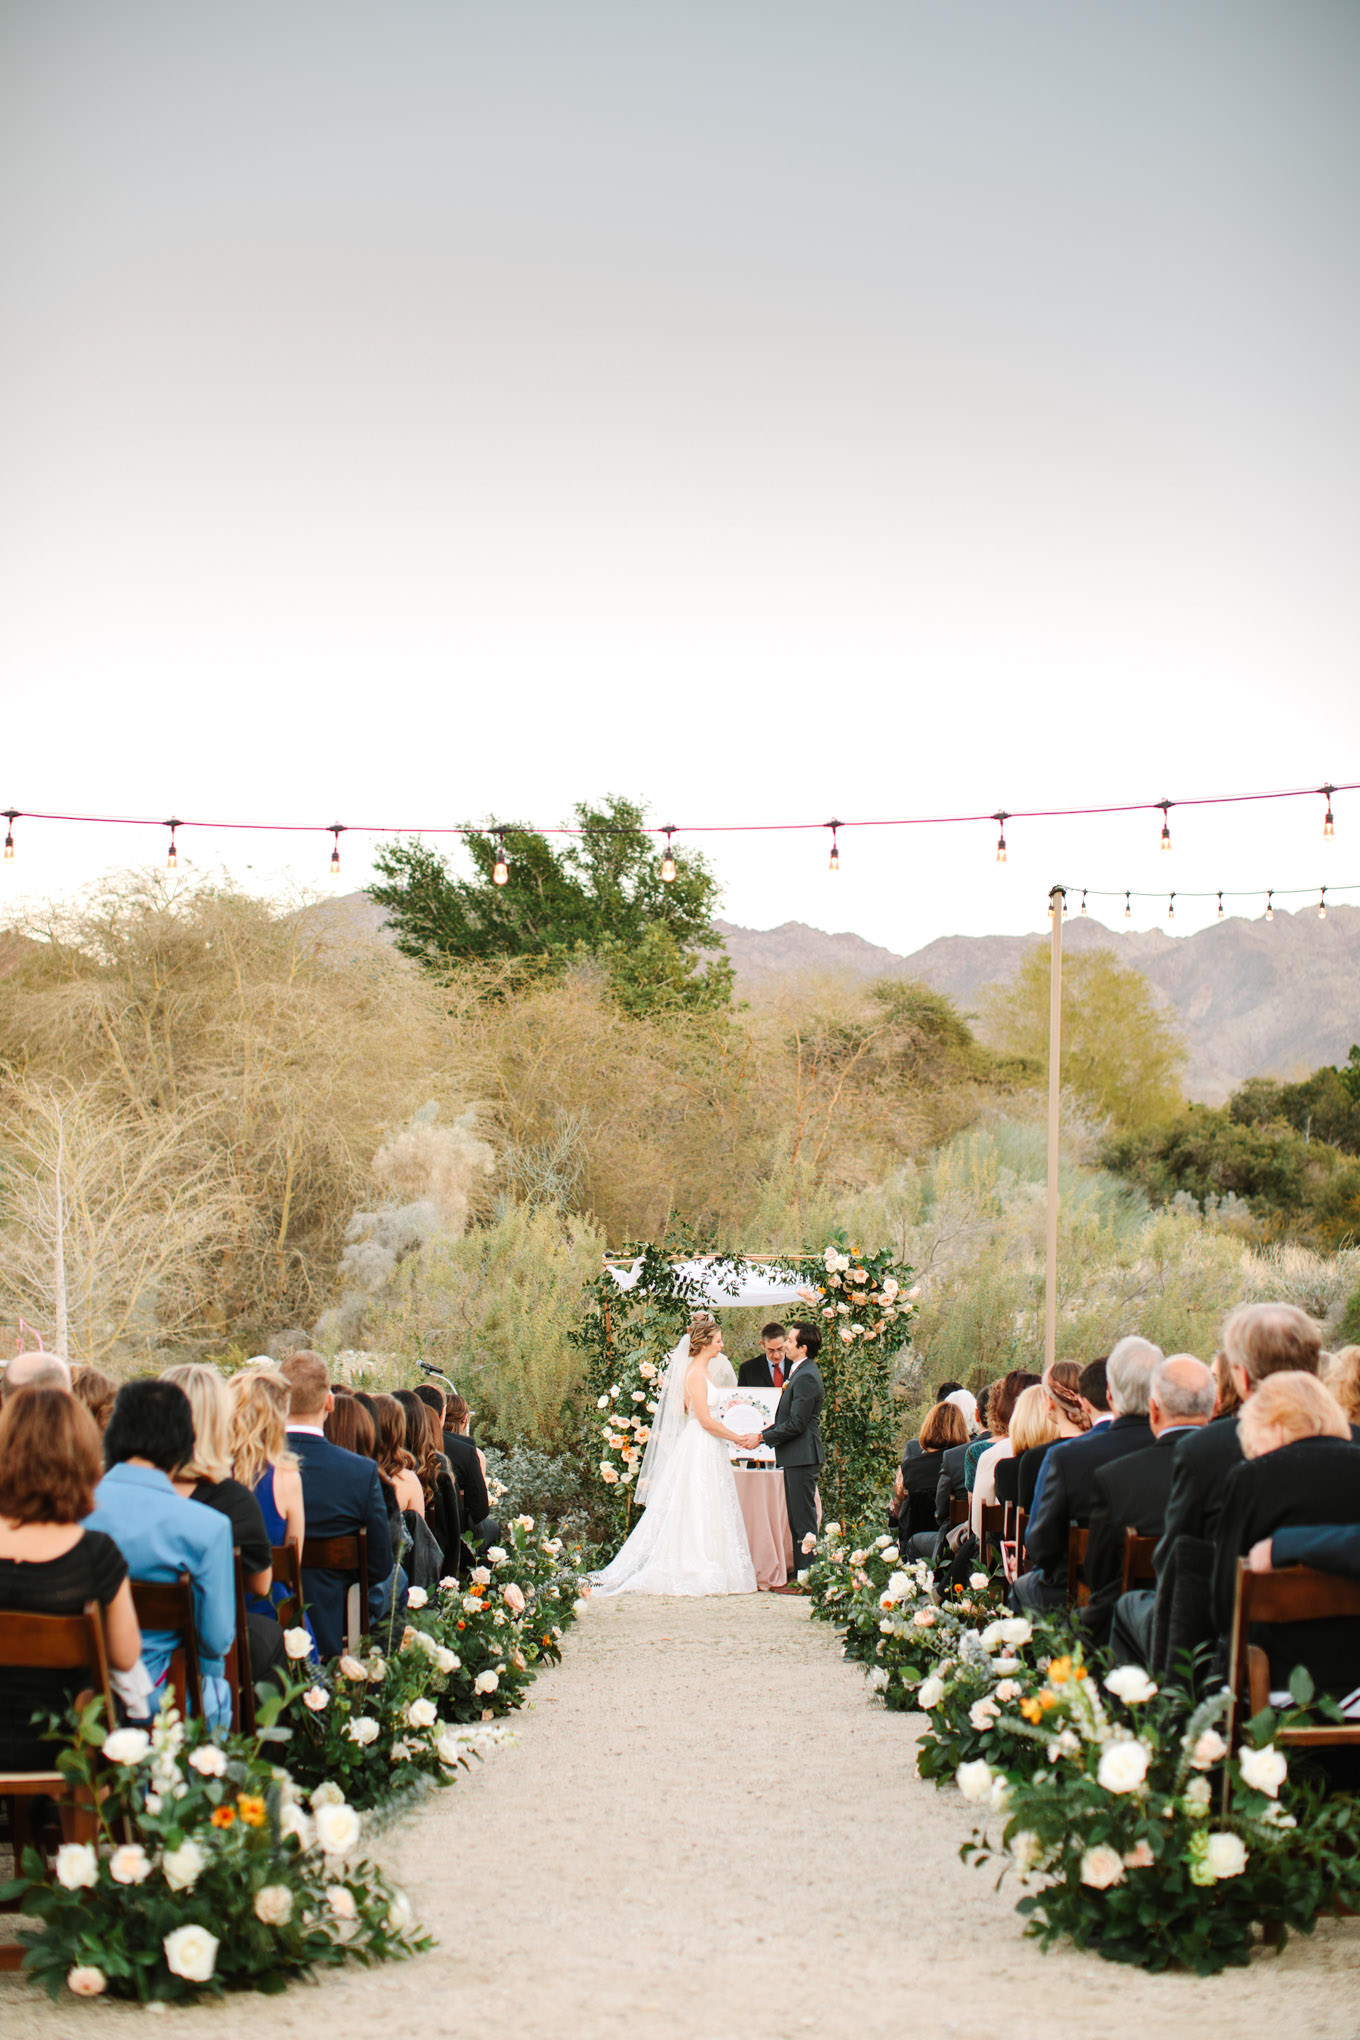 Wide shot of wedding ceremony | Living Desert Zoo & Gardens wedding with unique details | Elevated and colorful wedding photography for fun-loving couples in Southern California |  #PalmSprings #palmspringsphotographer #gardenwedding #palmspringswedding  Source: Mary Costa Photography | Los Angeles wedding photographer 